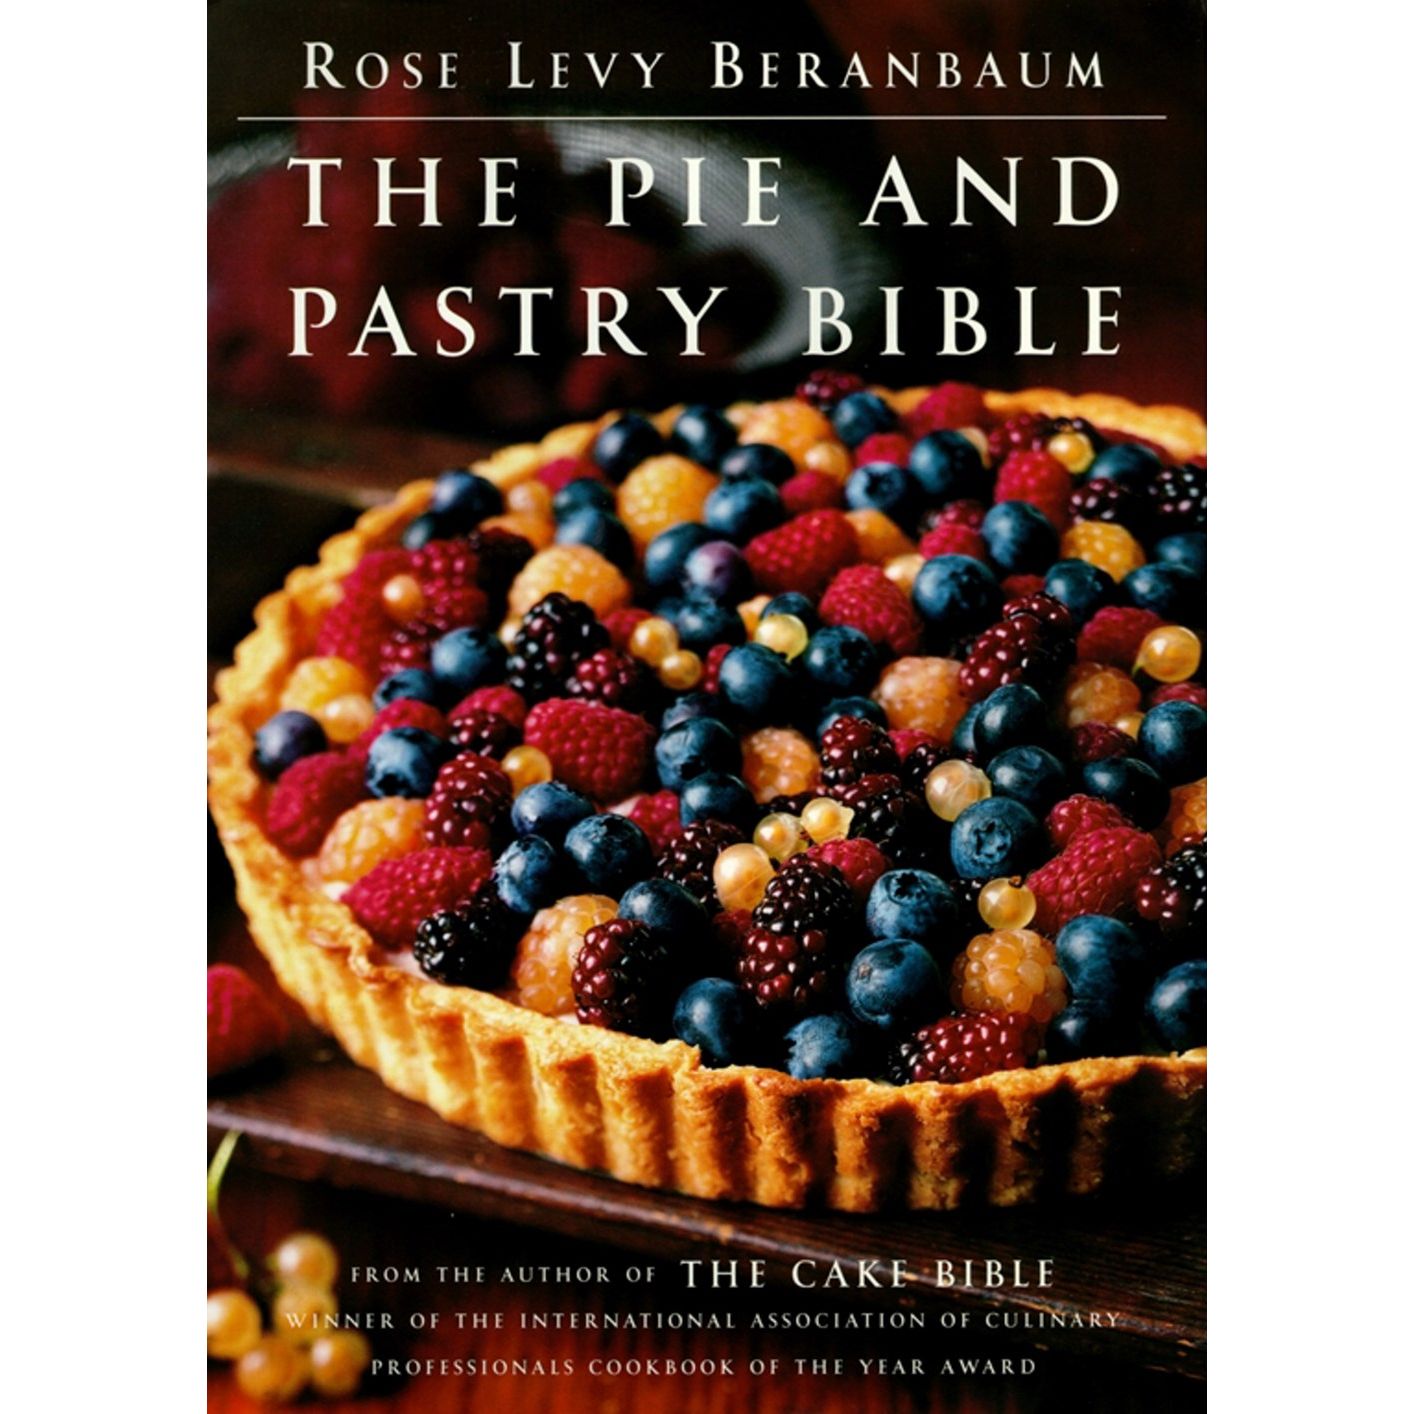 The Pie and Pastry Bible (Rose Levy Beranbaum)